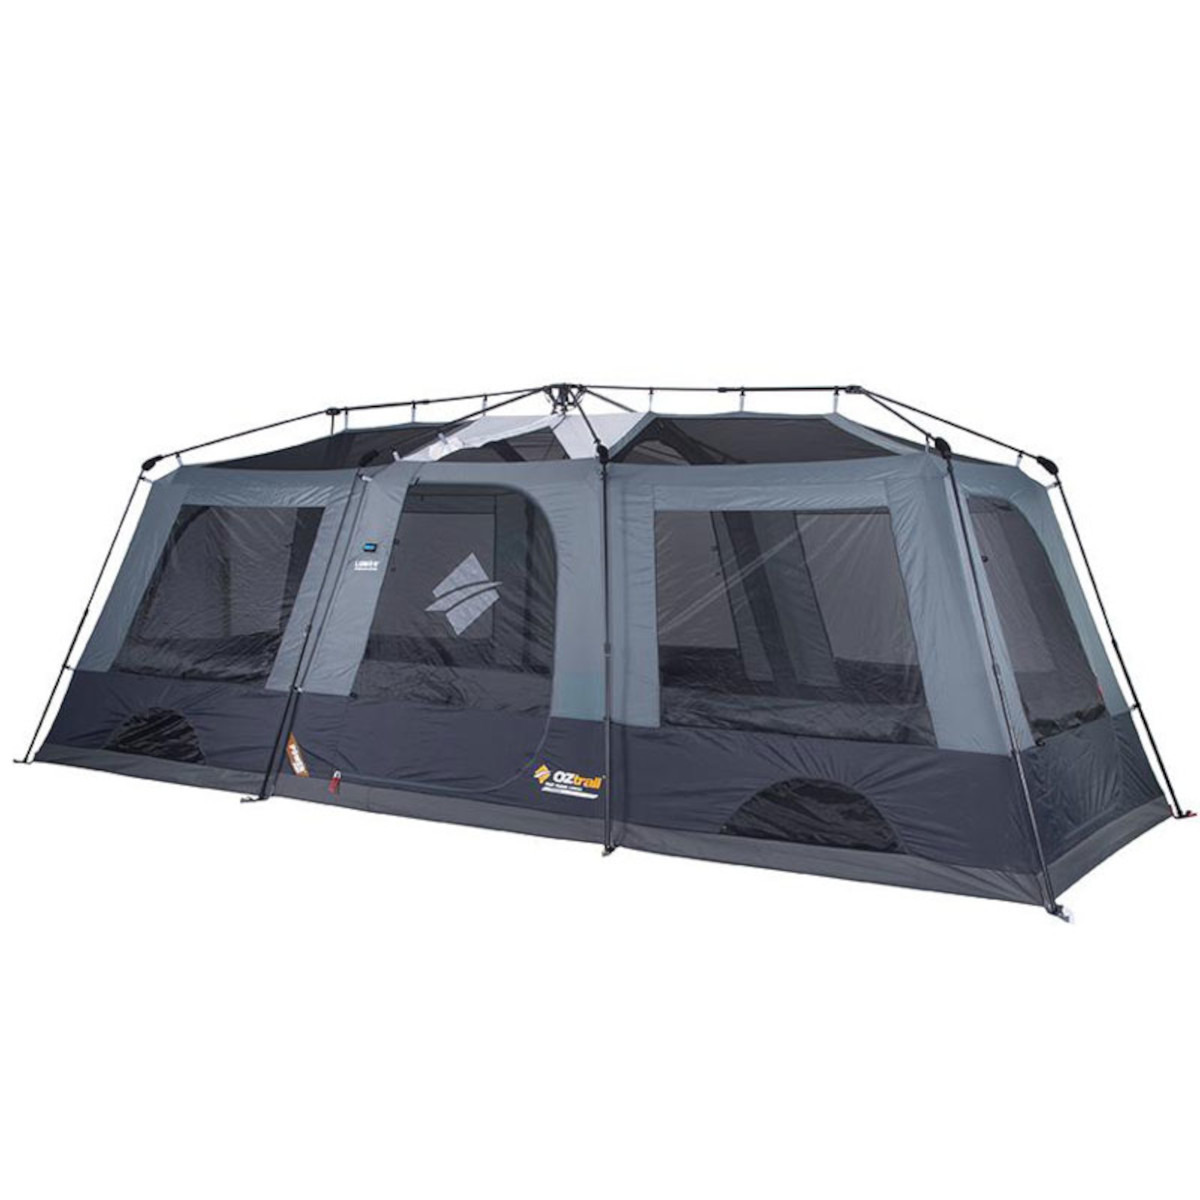 Oztrail Fast Frame Lumos 10P-camping tent